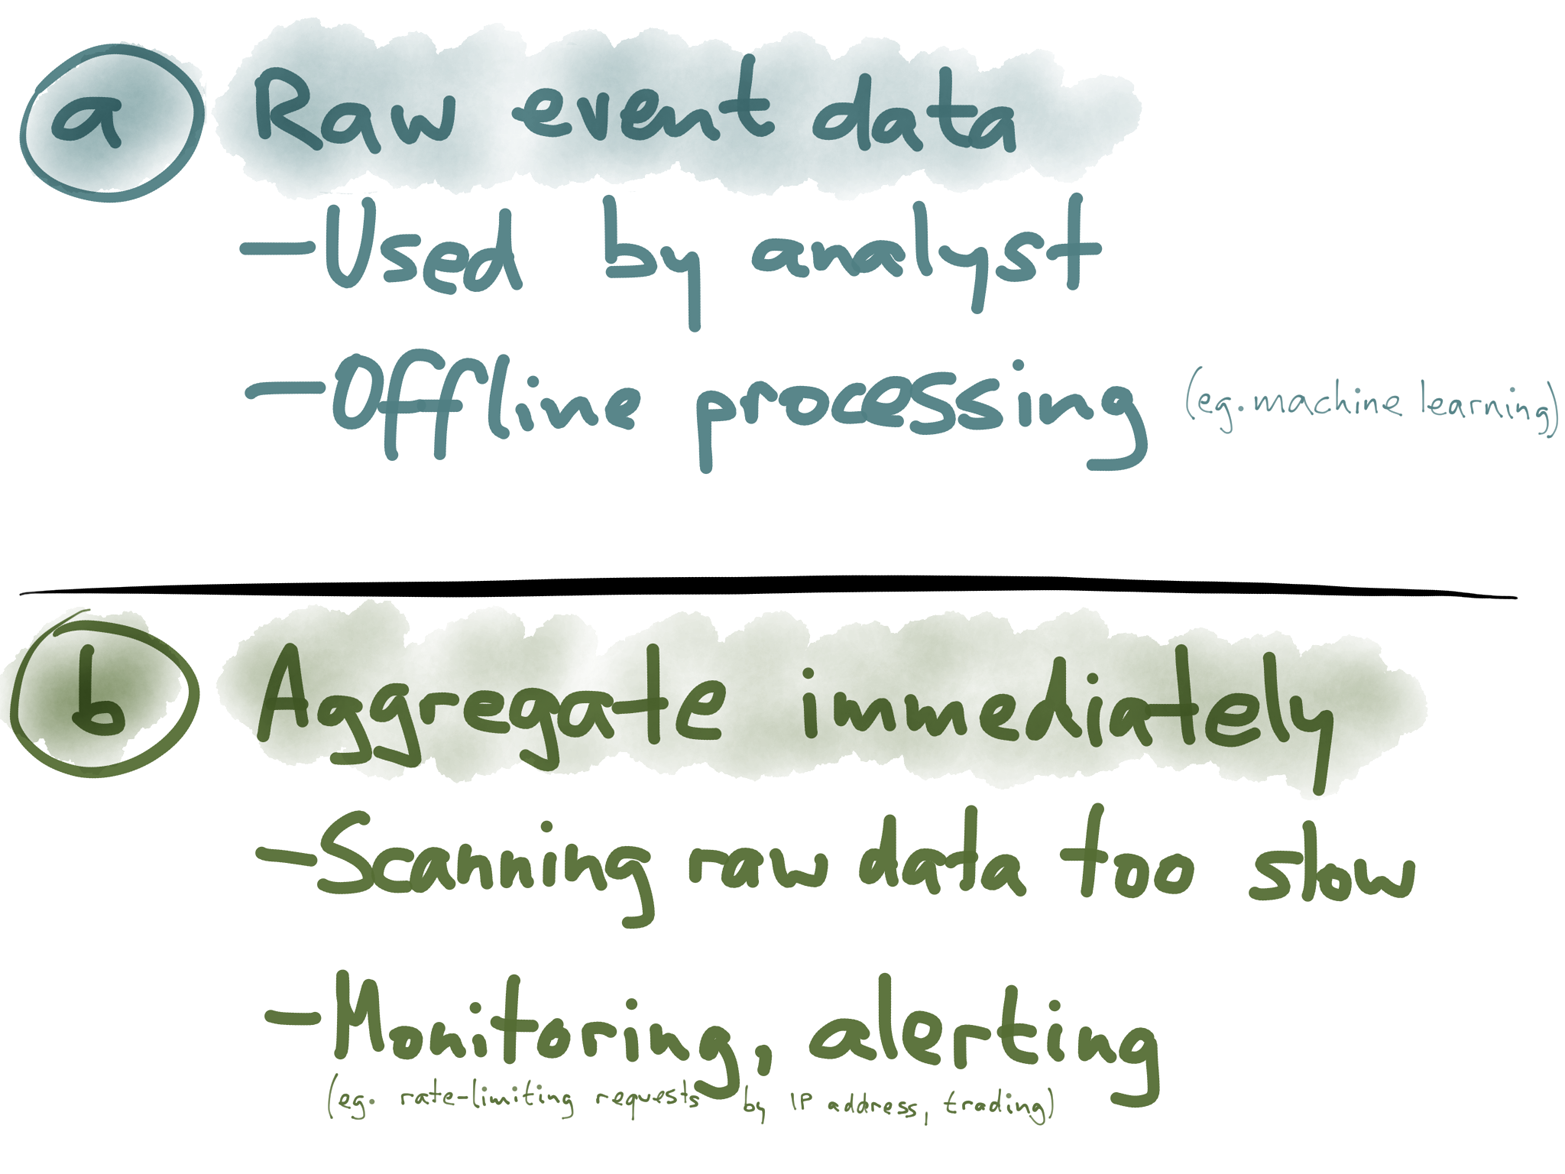 Storing raw event data versus aggregating immediately.